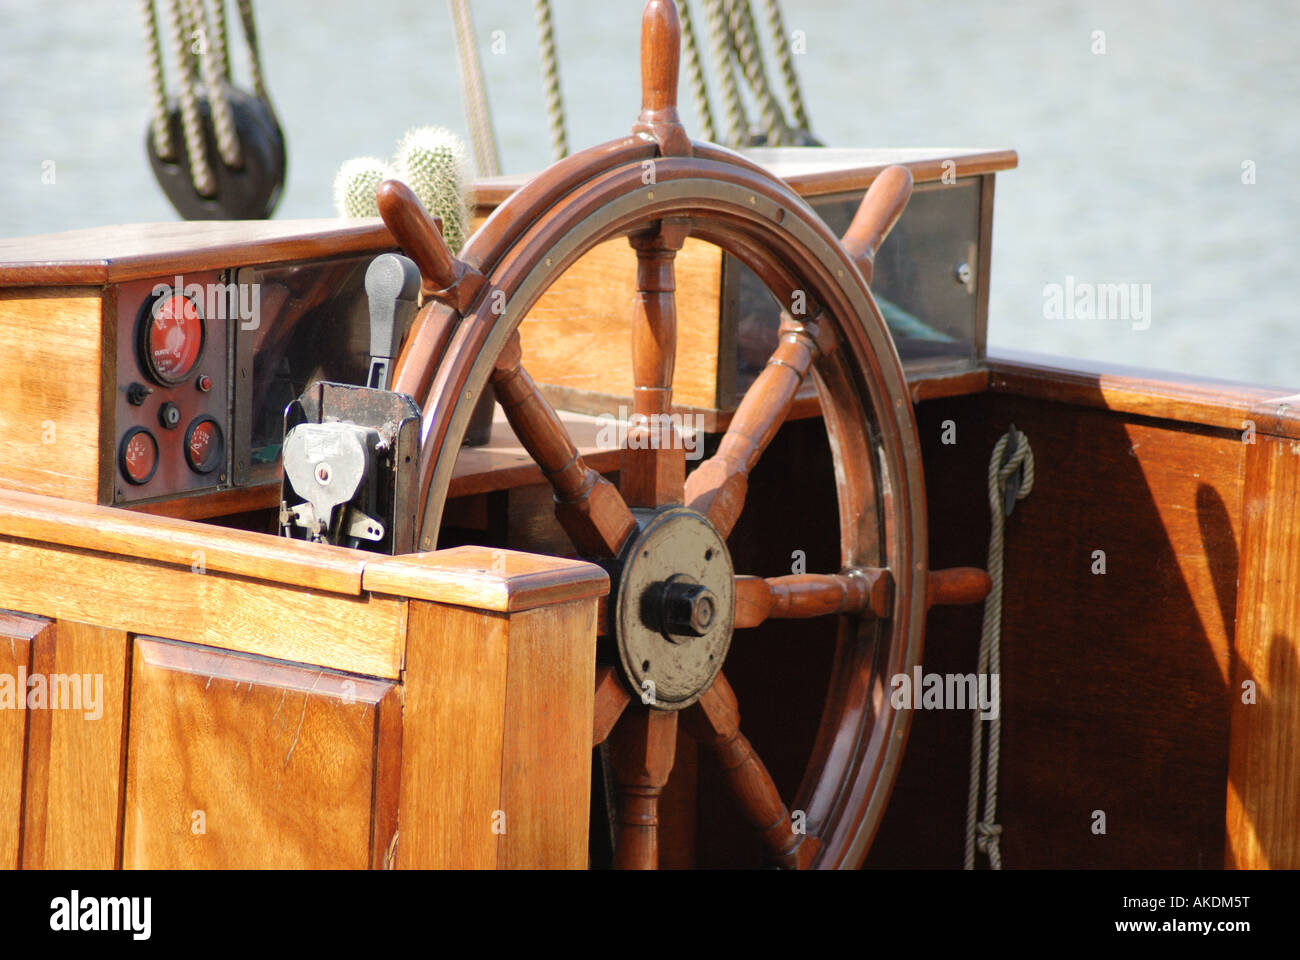 Helm wheel which steers boat moored in a harbour in Hull docks on a sunny day, background includes wood, ropes and shadows. Stock Photo